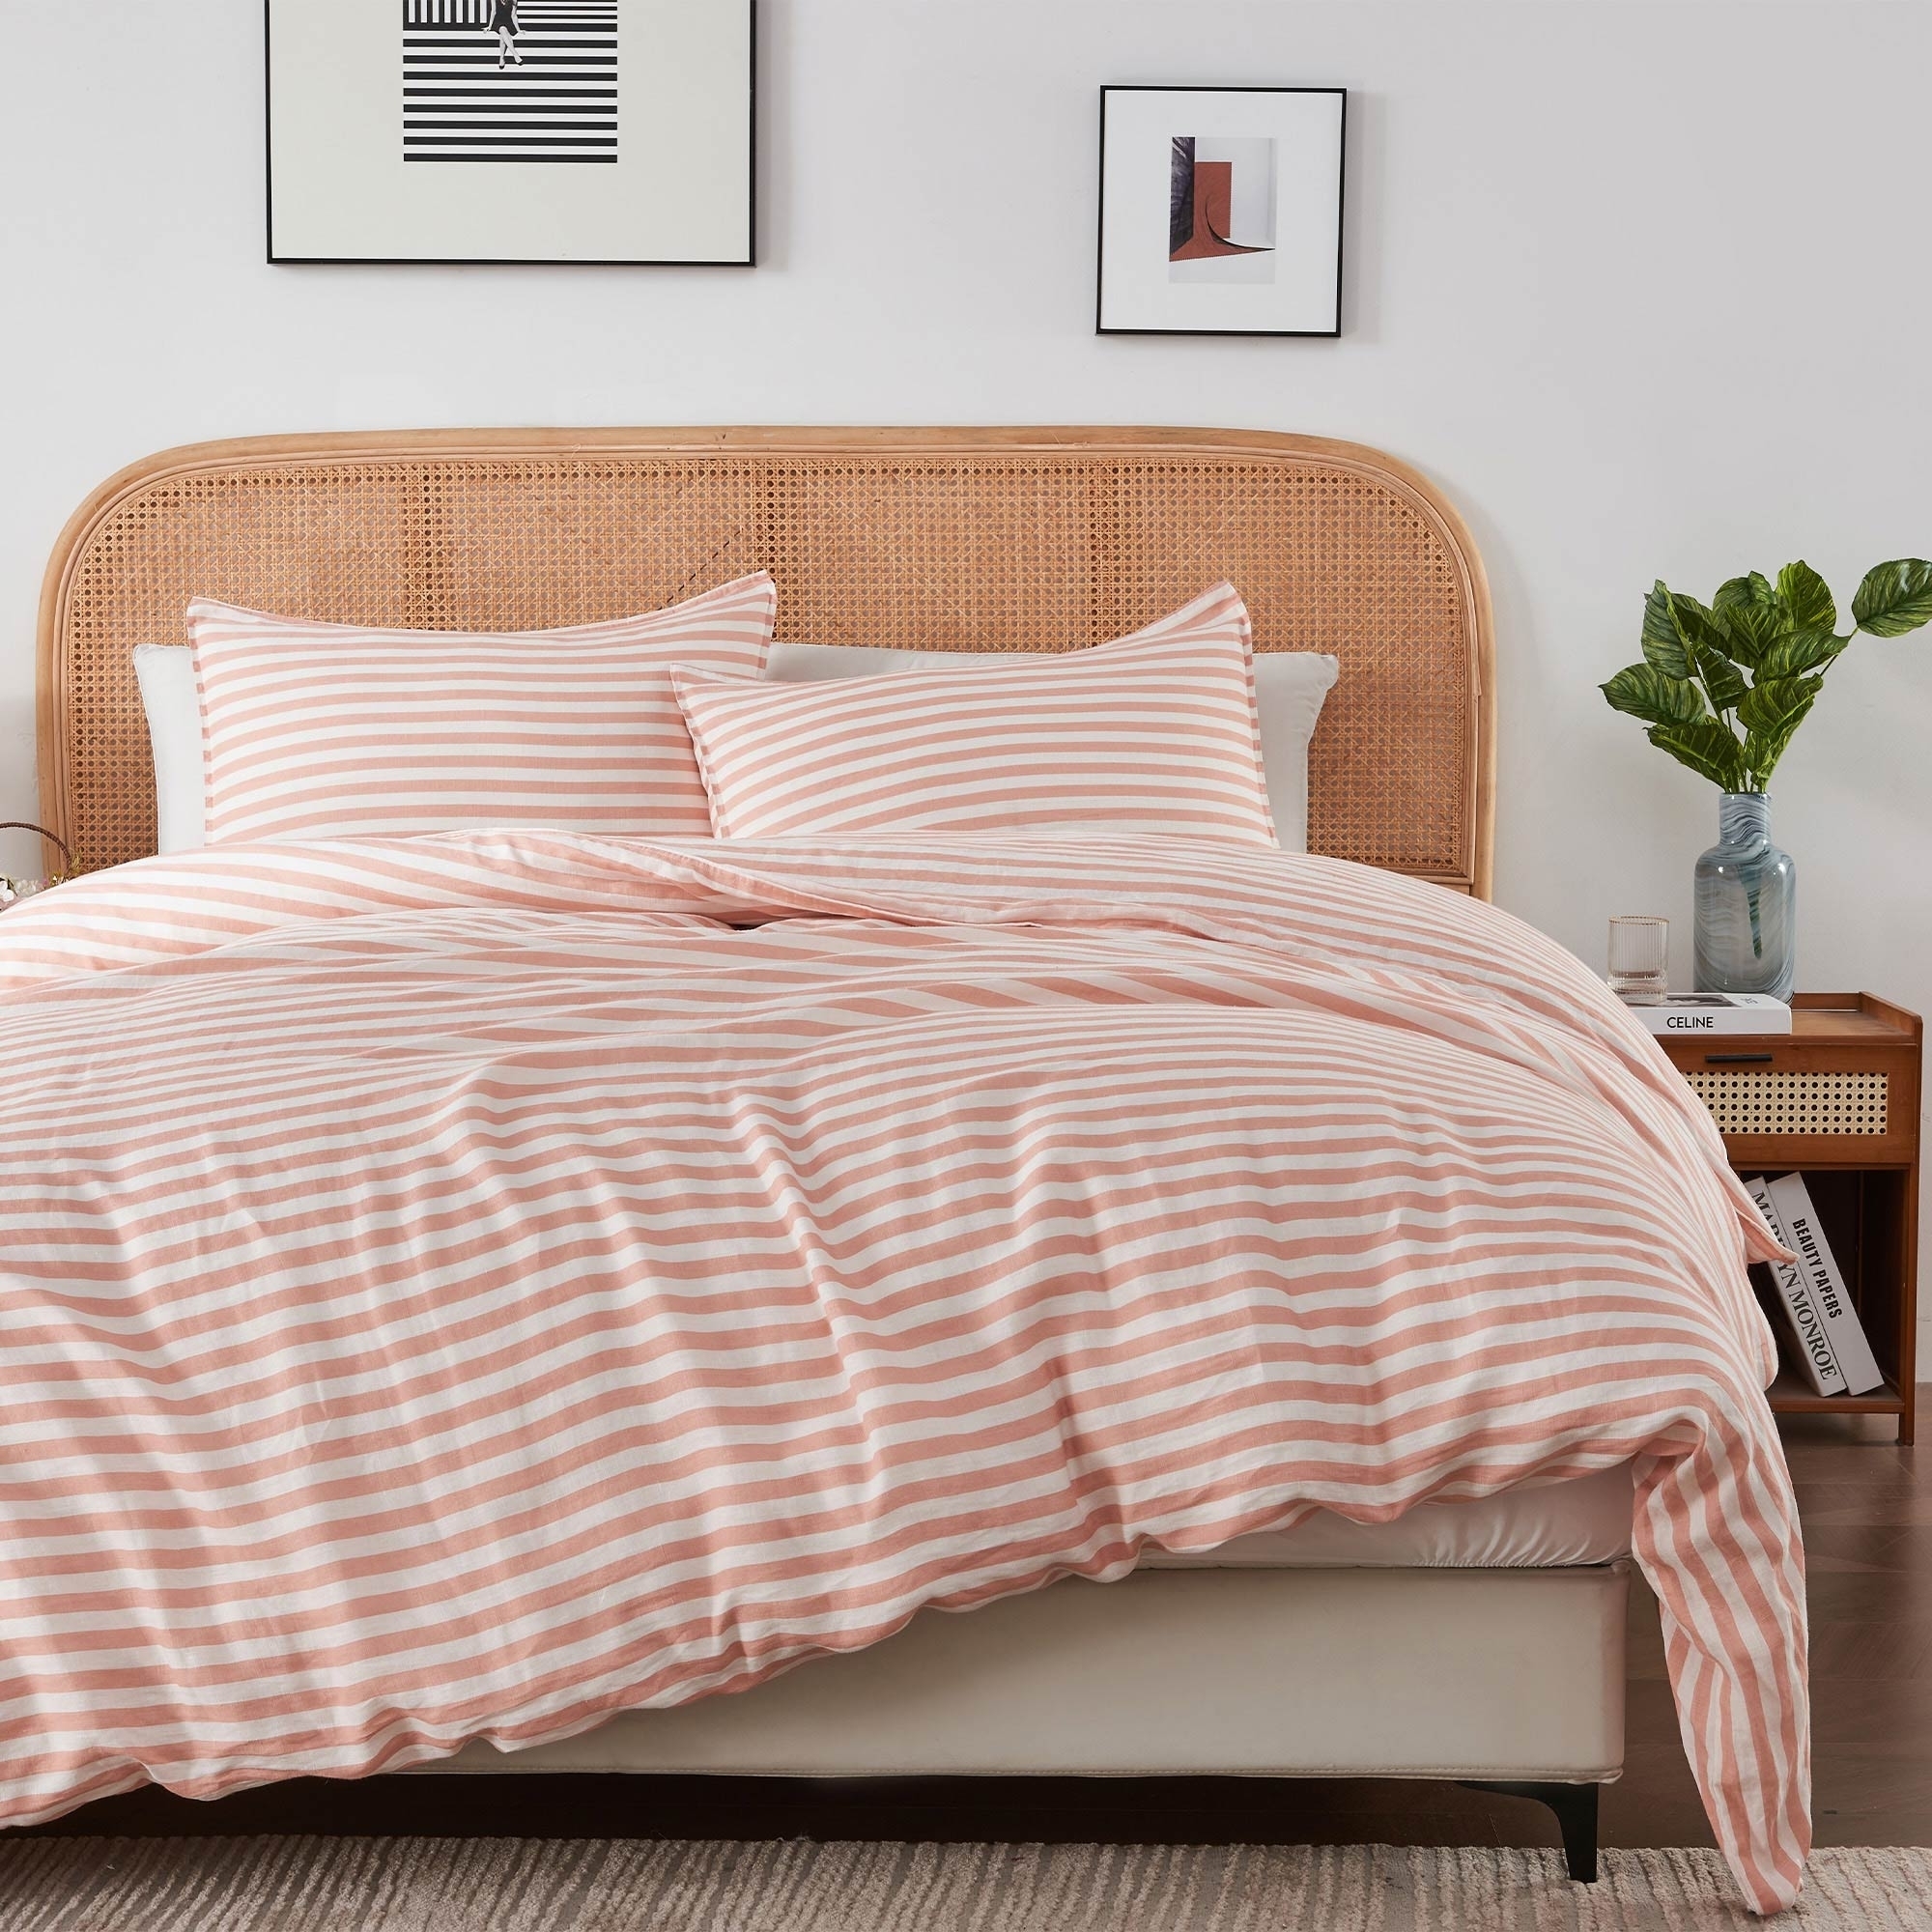 Queen Size Washed Flax Linen Duvet Cover With Shams, Stripe Design, 3 Piece Bedding Duvet Cover Set - Coral